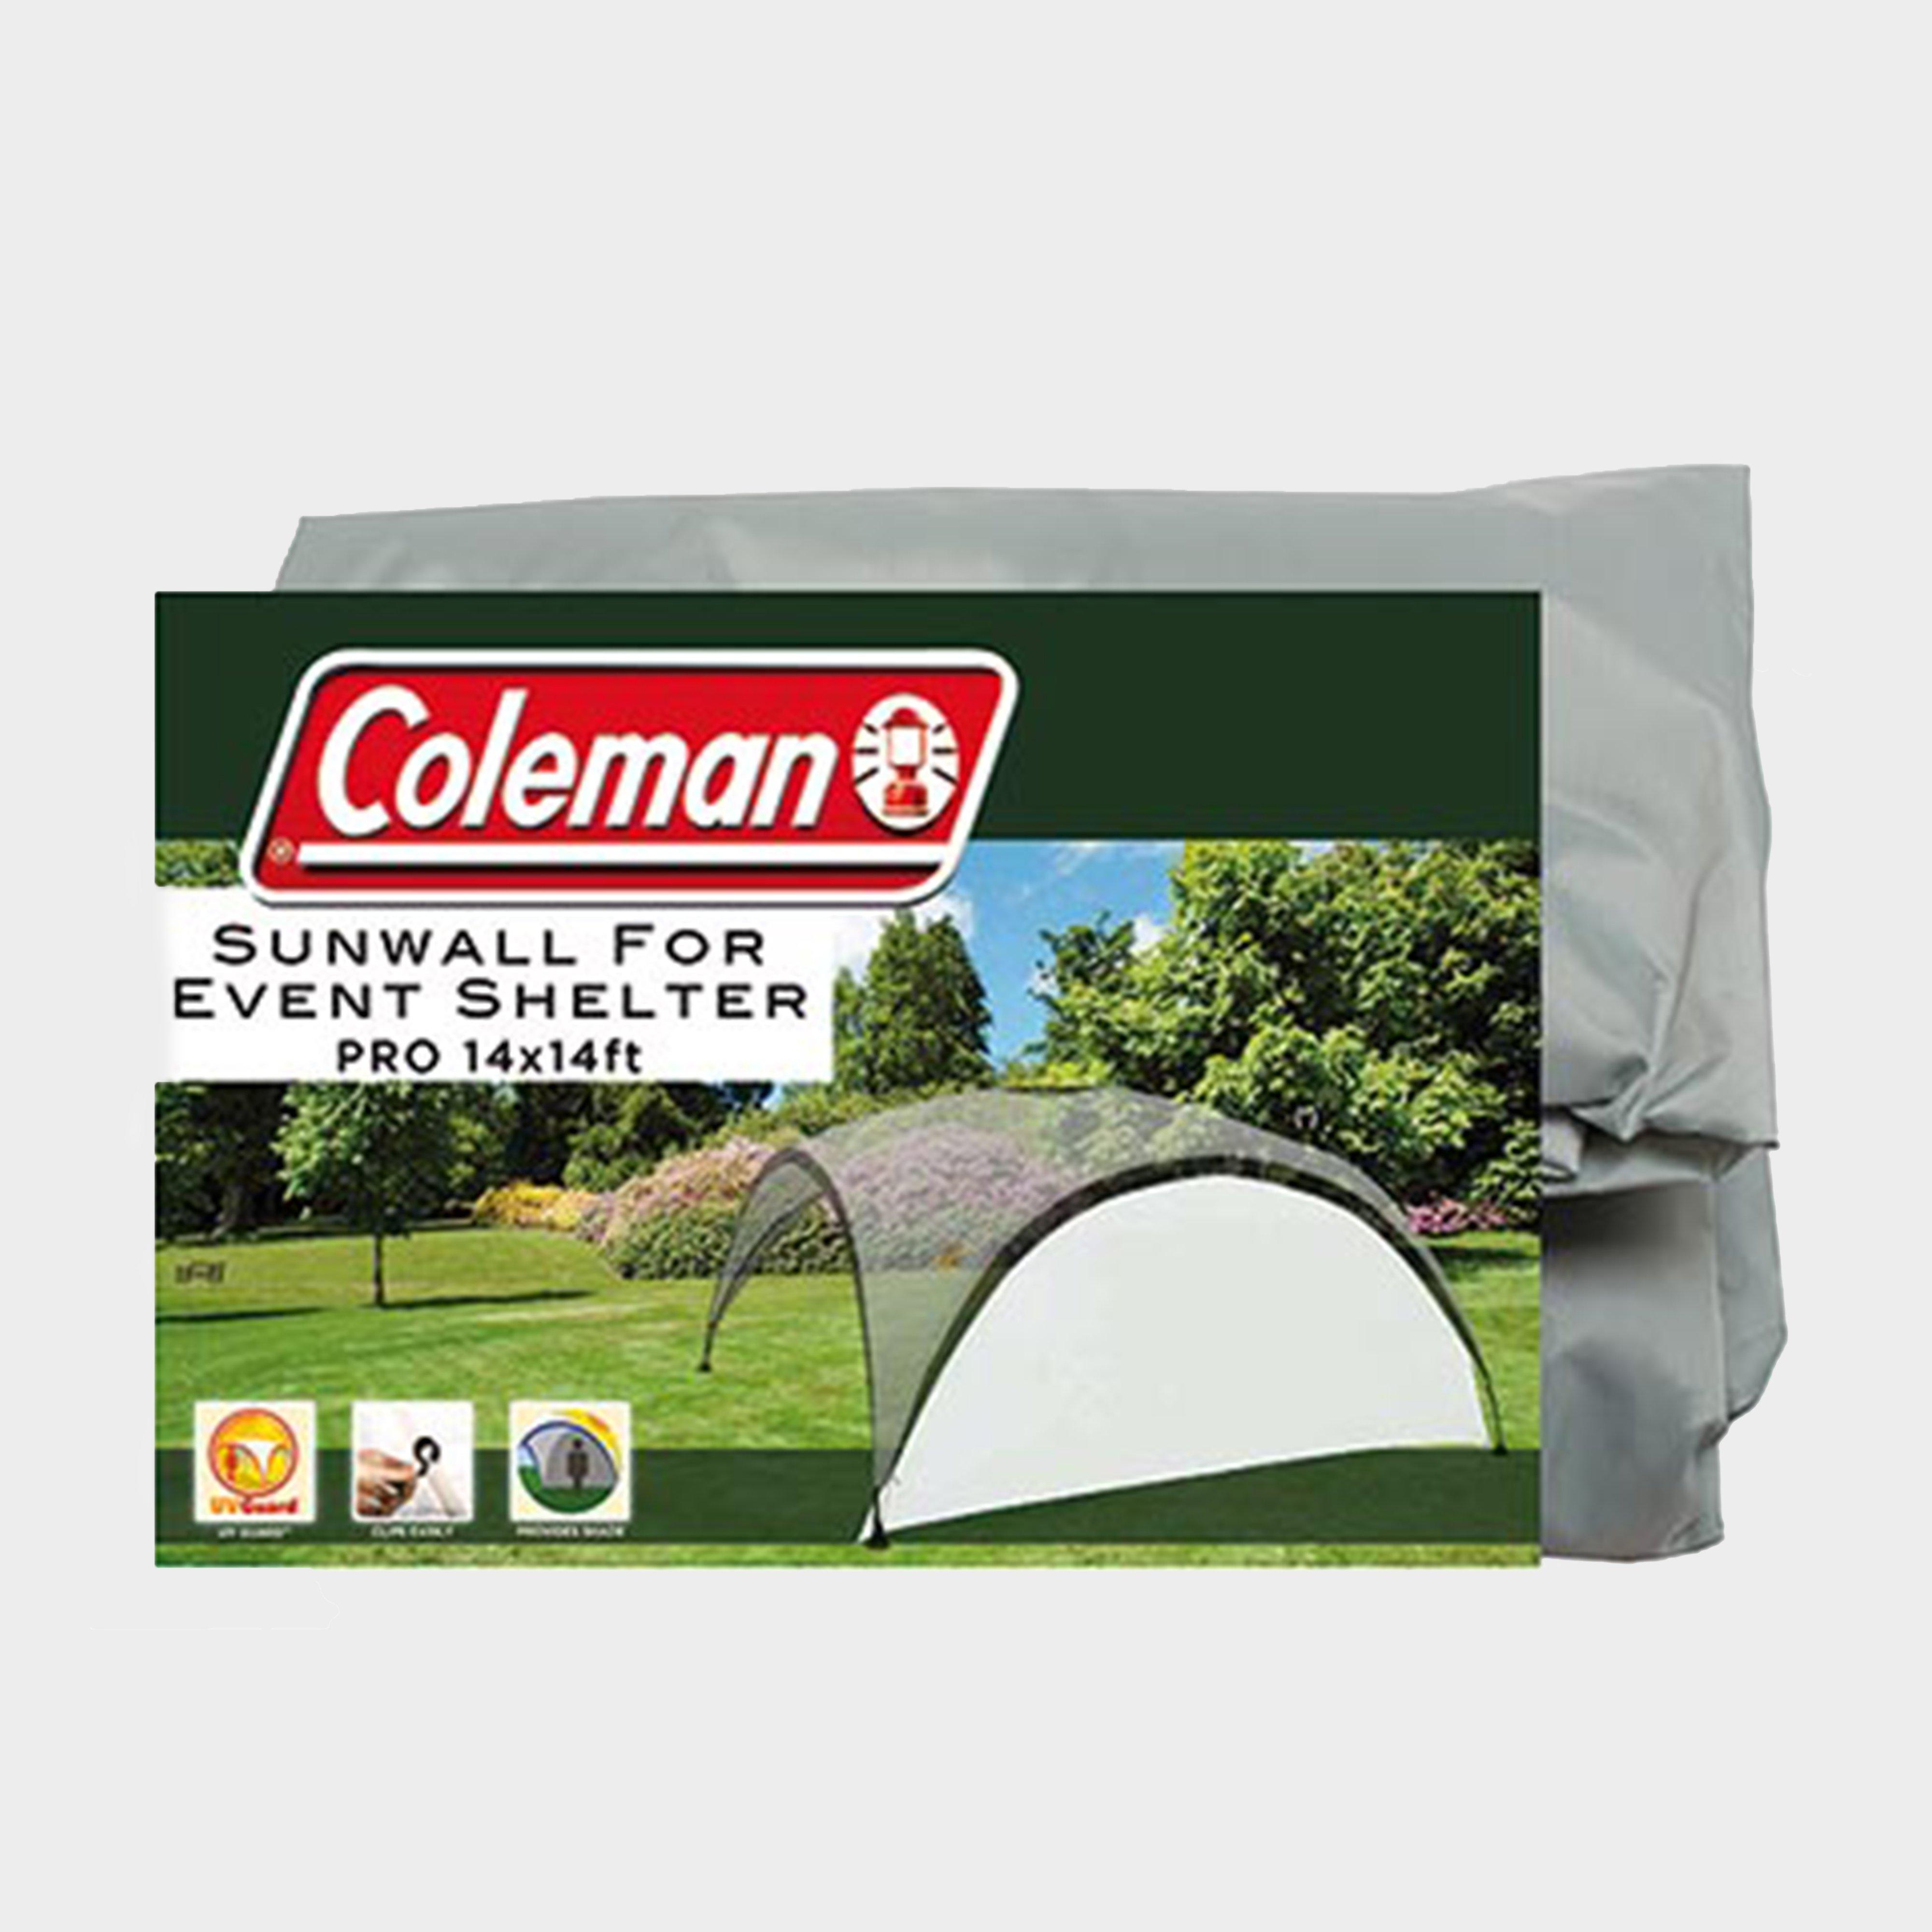 COLEMAN Sunwall for Event Shelter Pro (14' x x14'), Grey